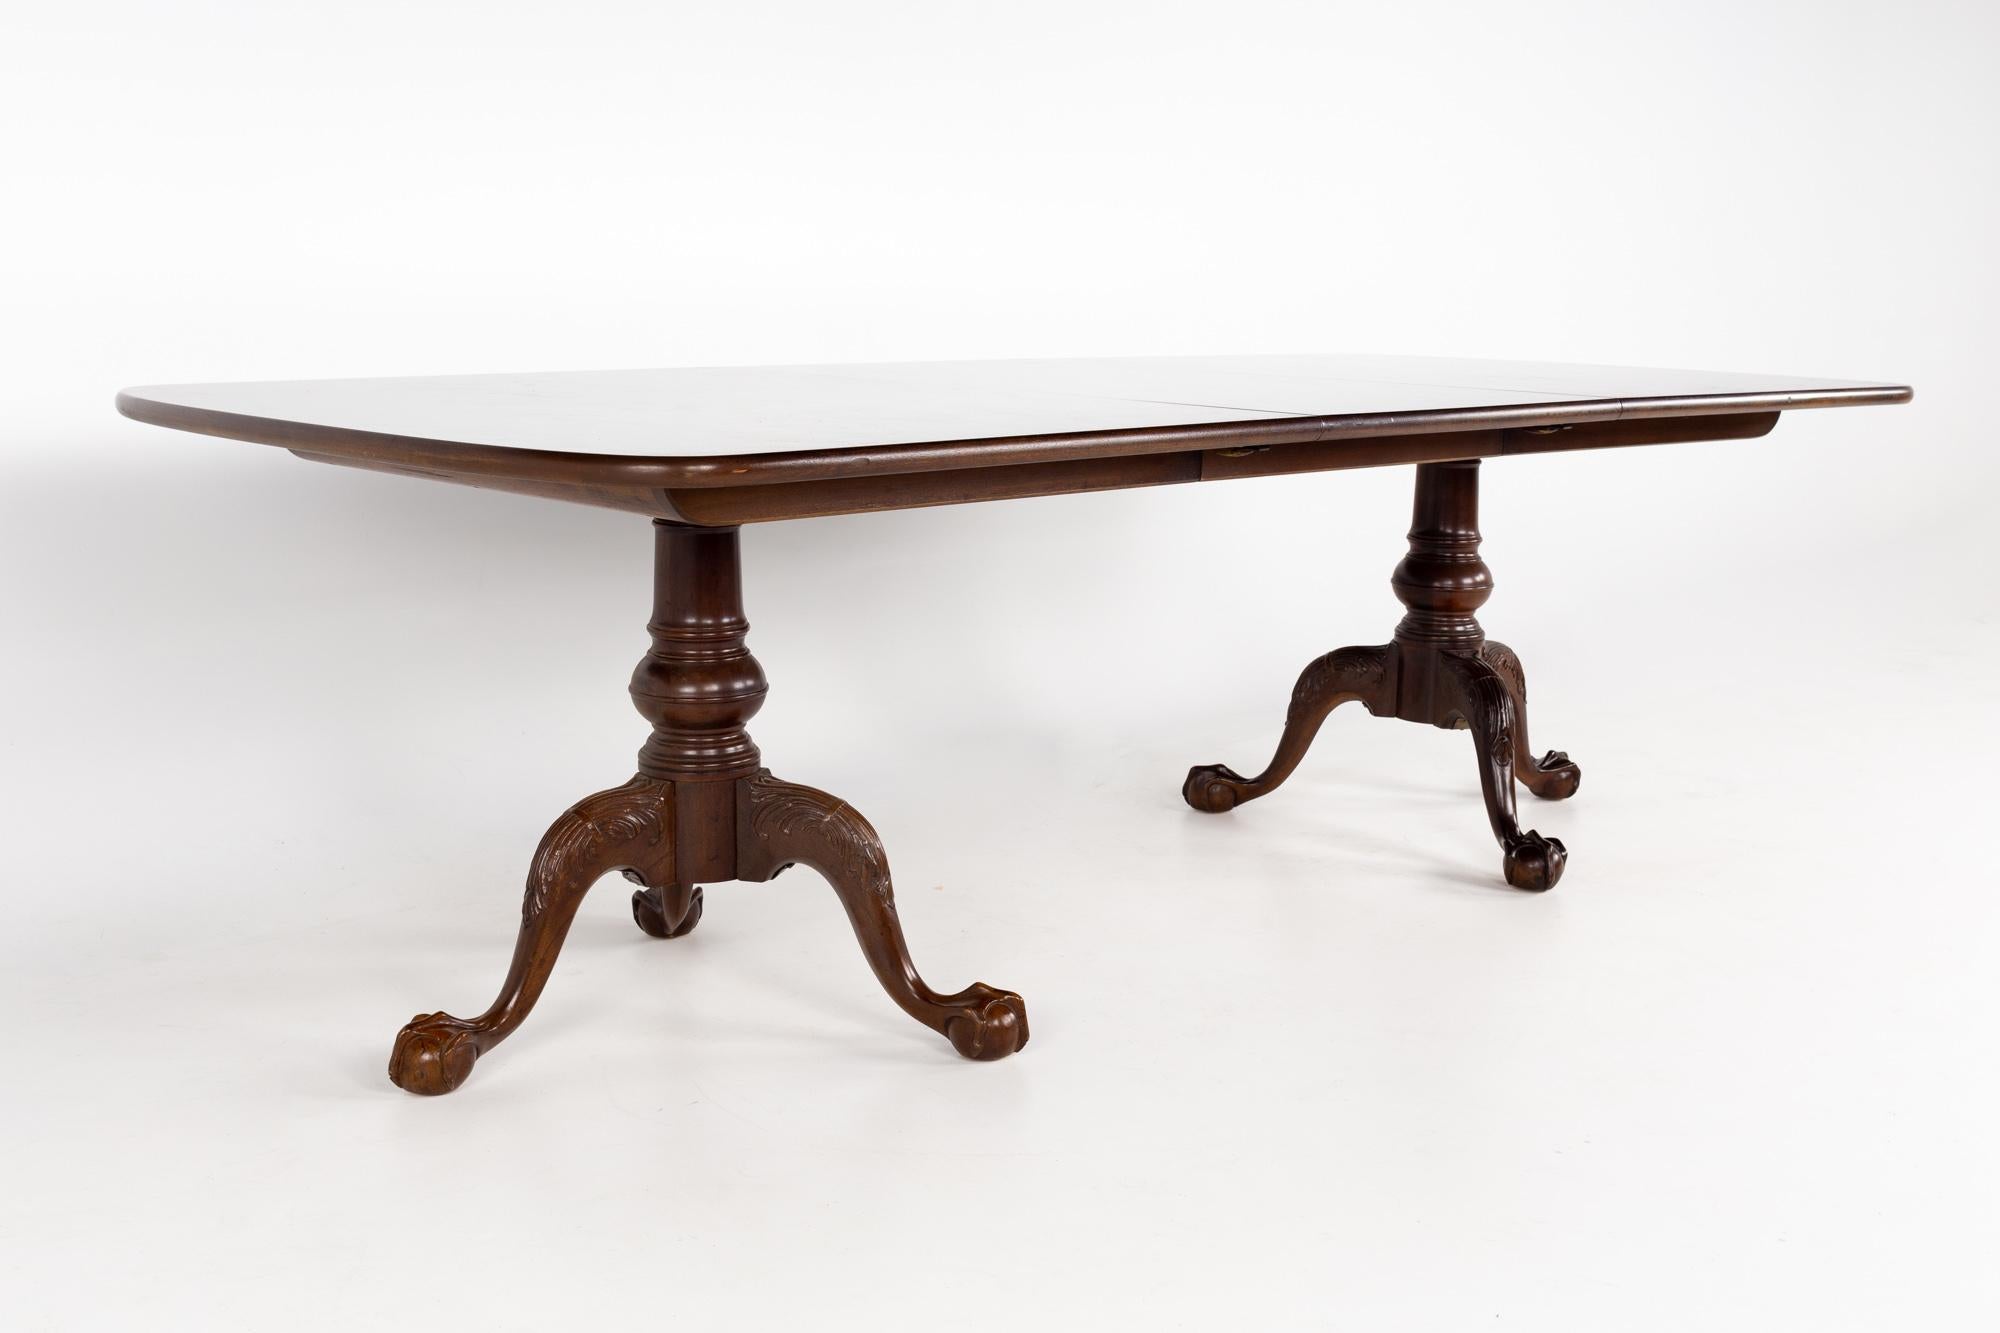 Henredon Aston Court Mahogany Dining Table with 2 Leaves 2